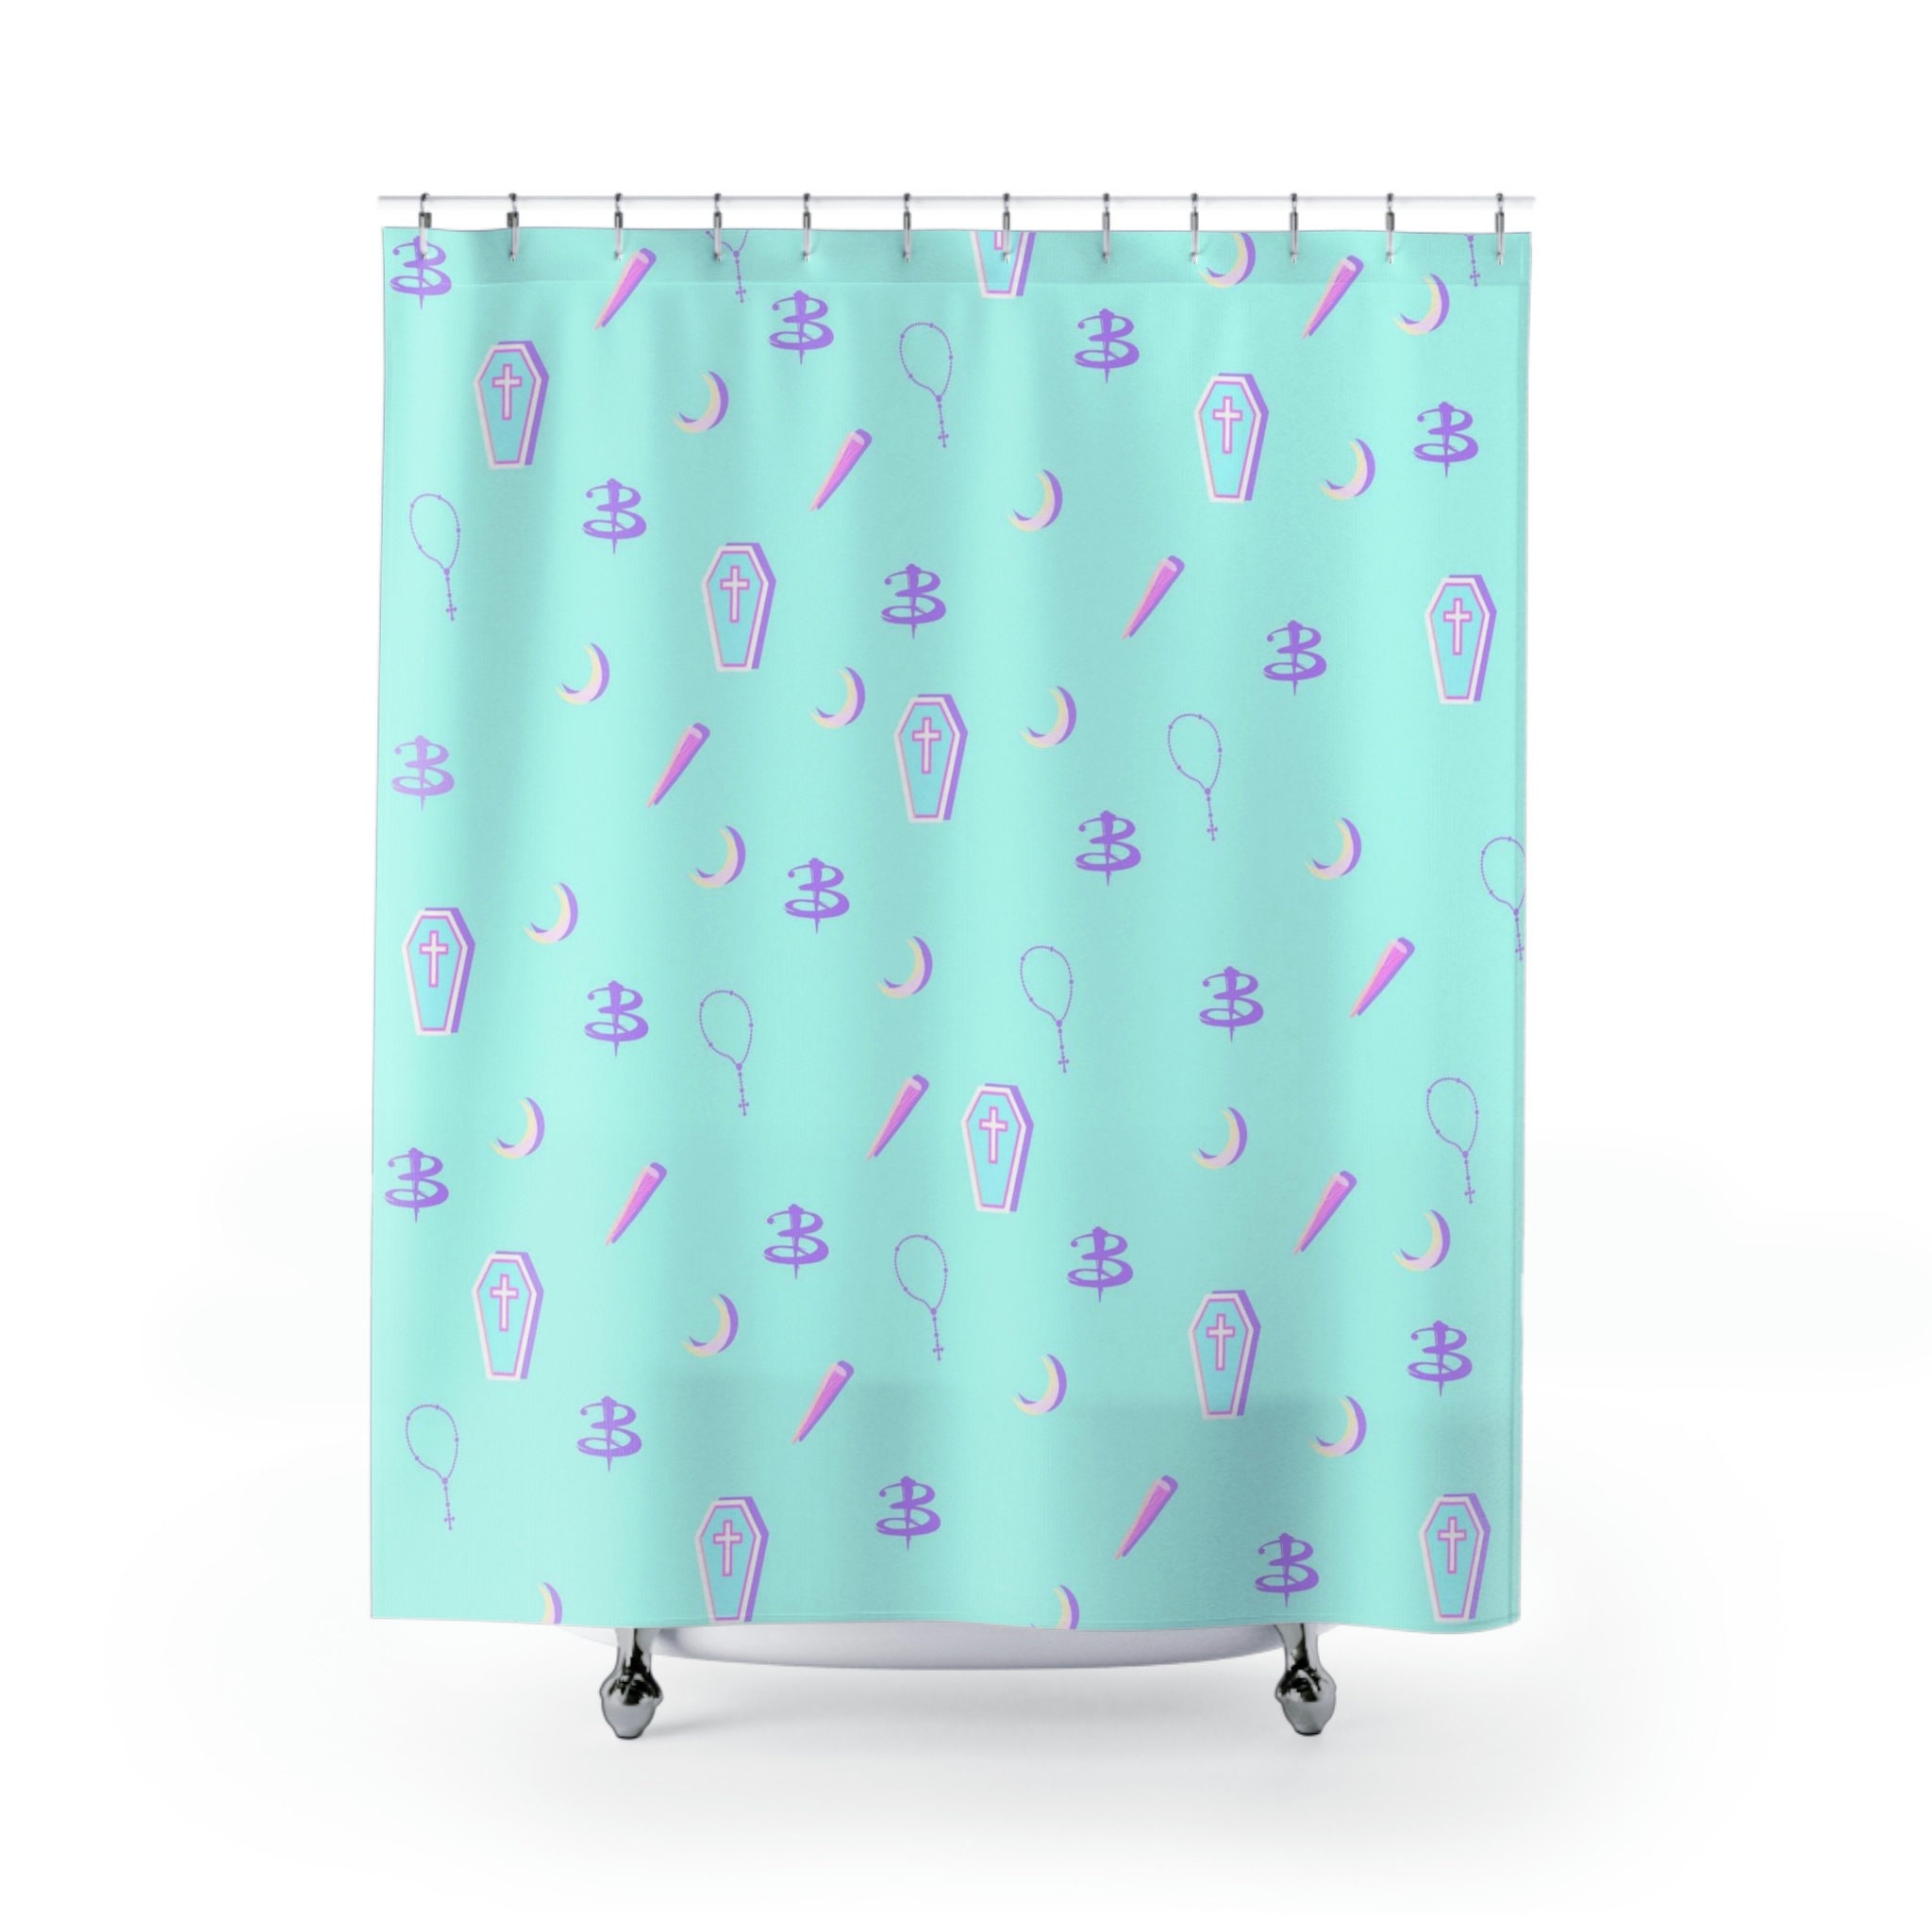 Pastel Horror Shower Curtain, 71x74 inches, Aesthetic Bathroom